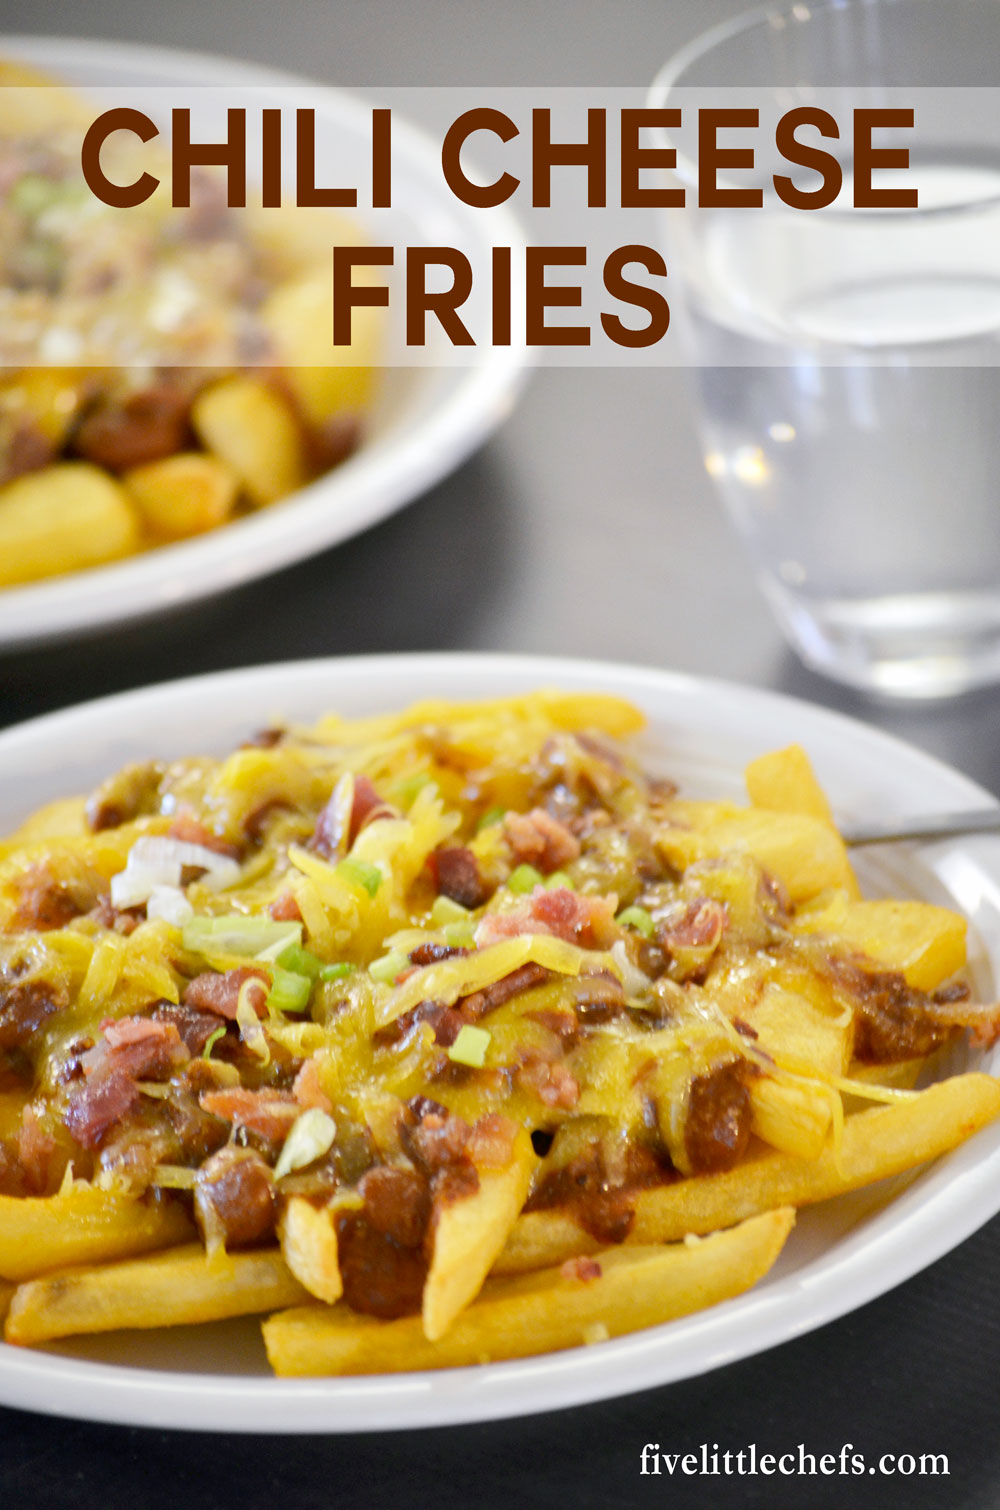 Chili Cheese Fries is an easy recipe because the fries are baked in the oven then are loaded up and ready to eat.